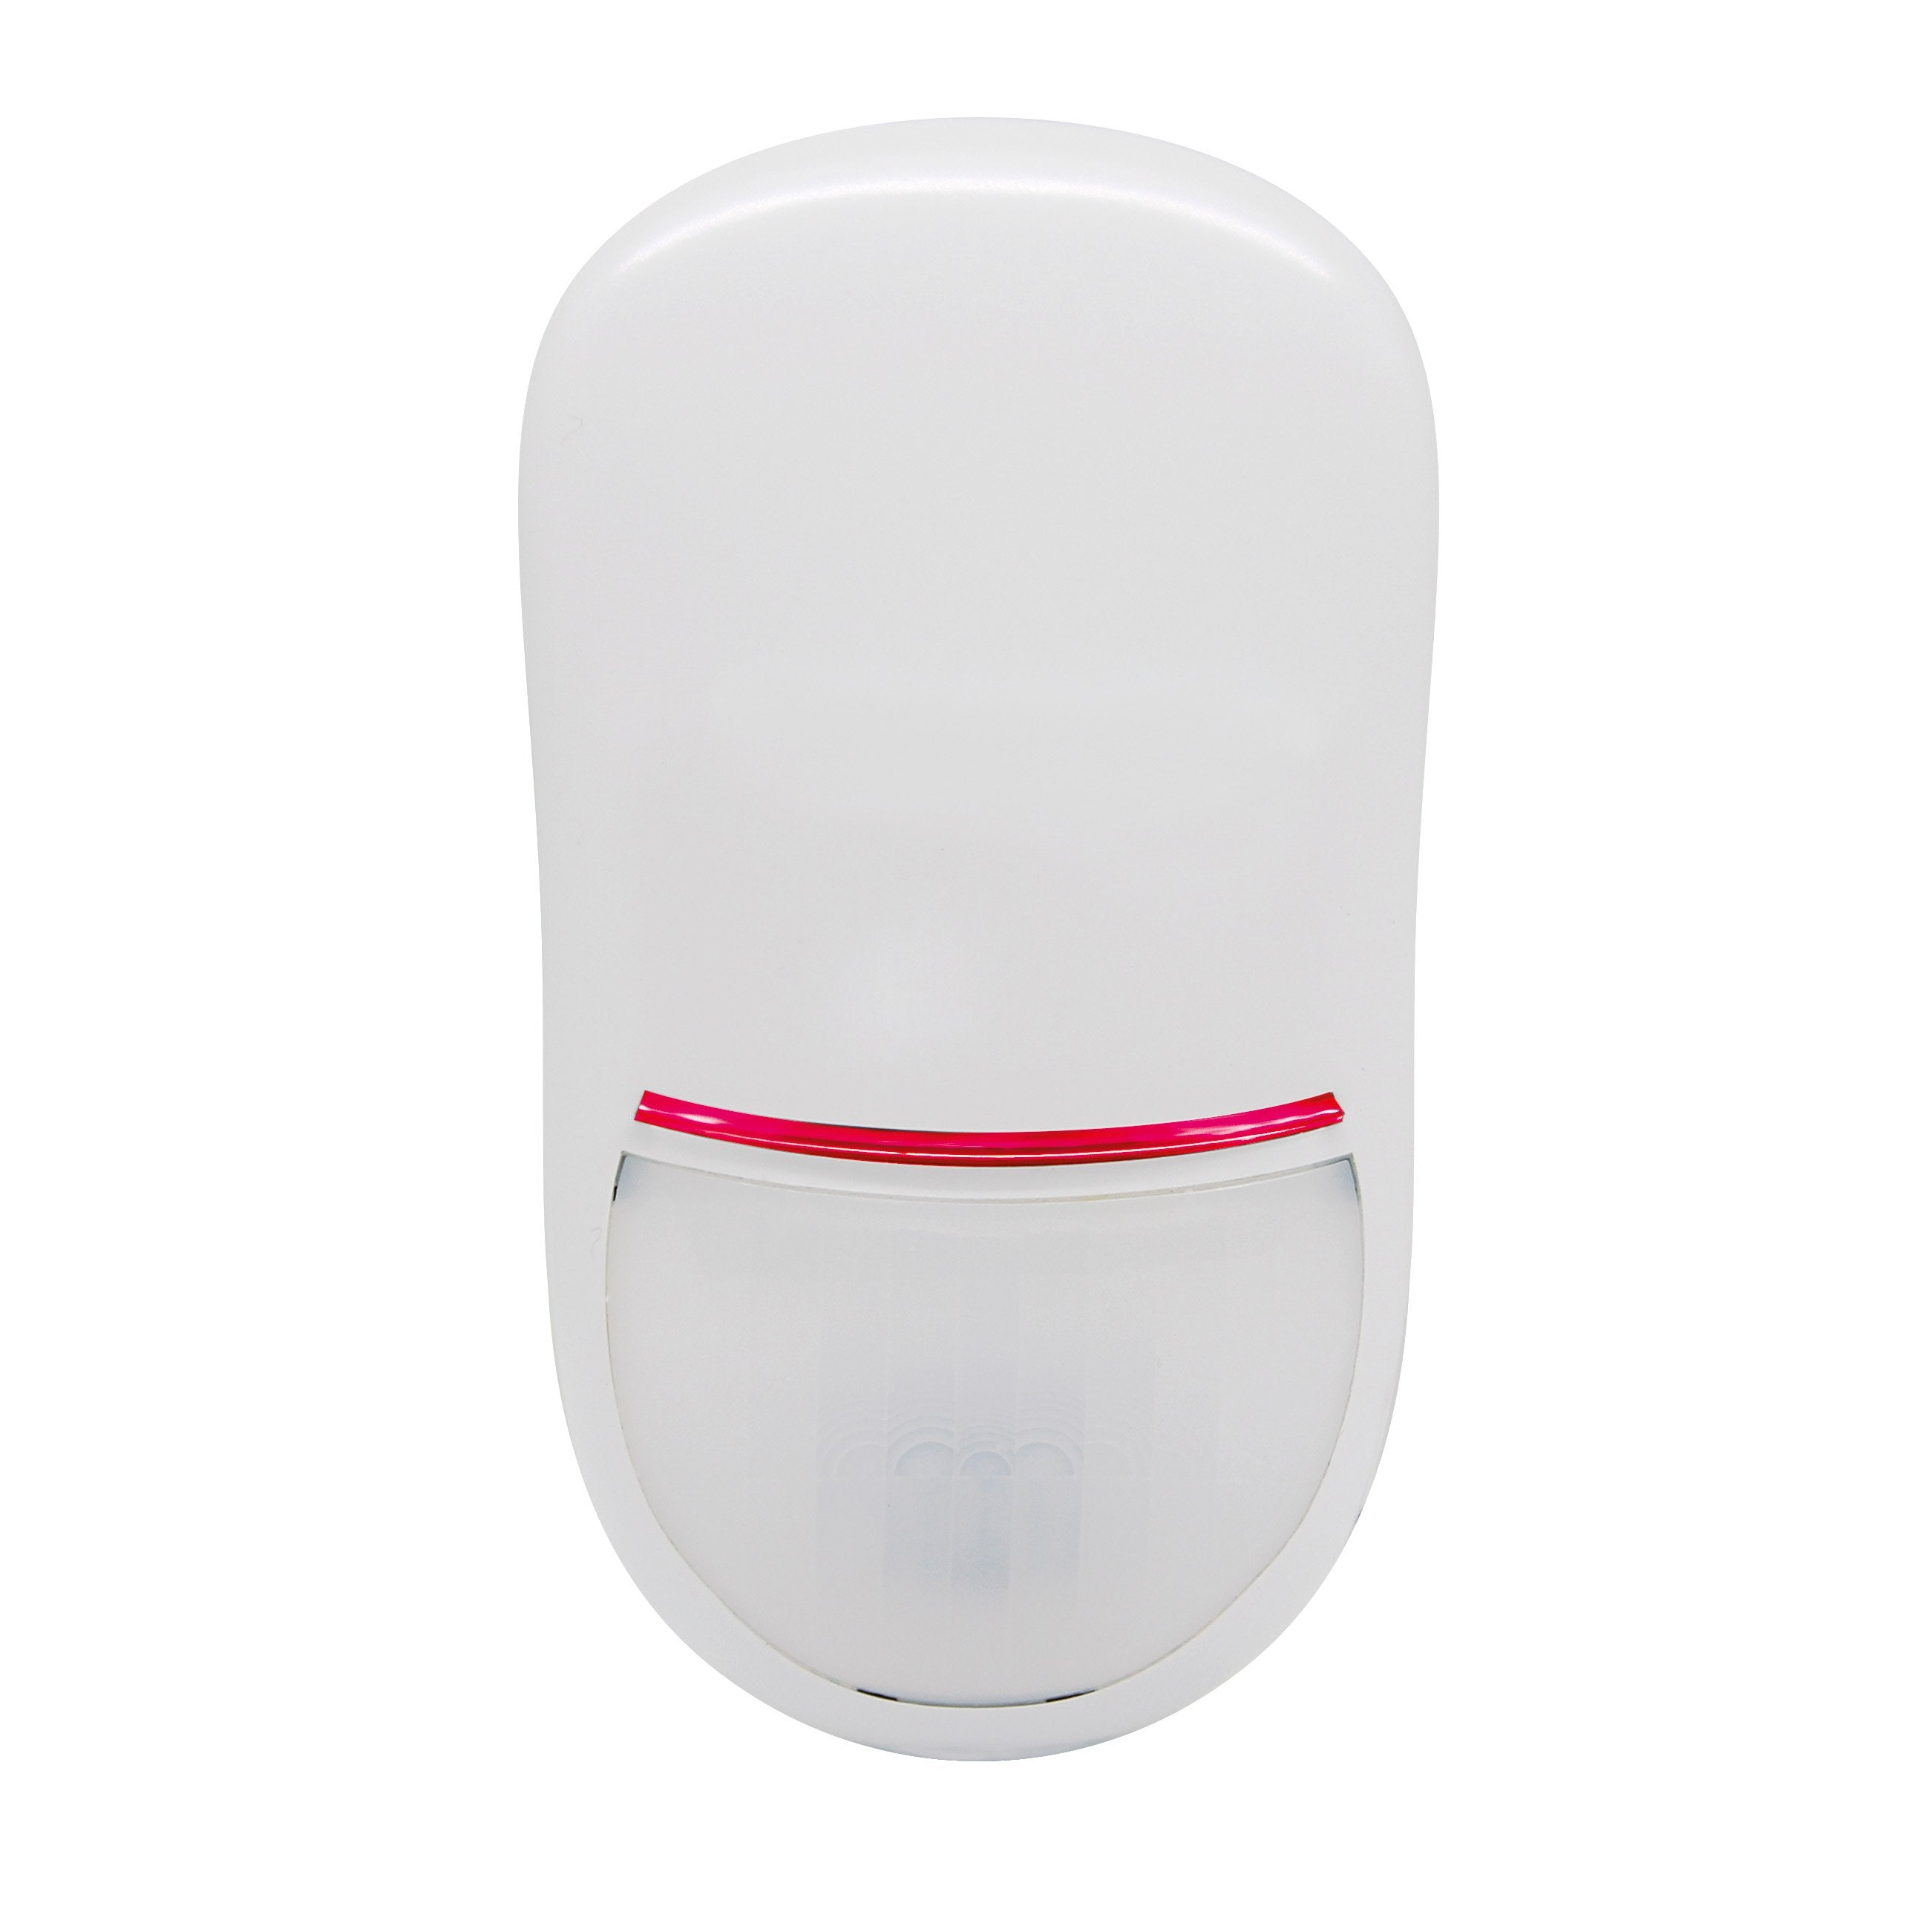 DSC PIR Motion and Microwave 10.525GHz Detector with PET Immunity (up to 15KGS) and Range 15M